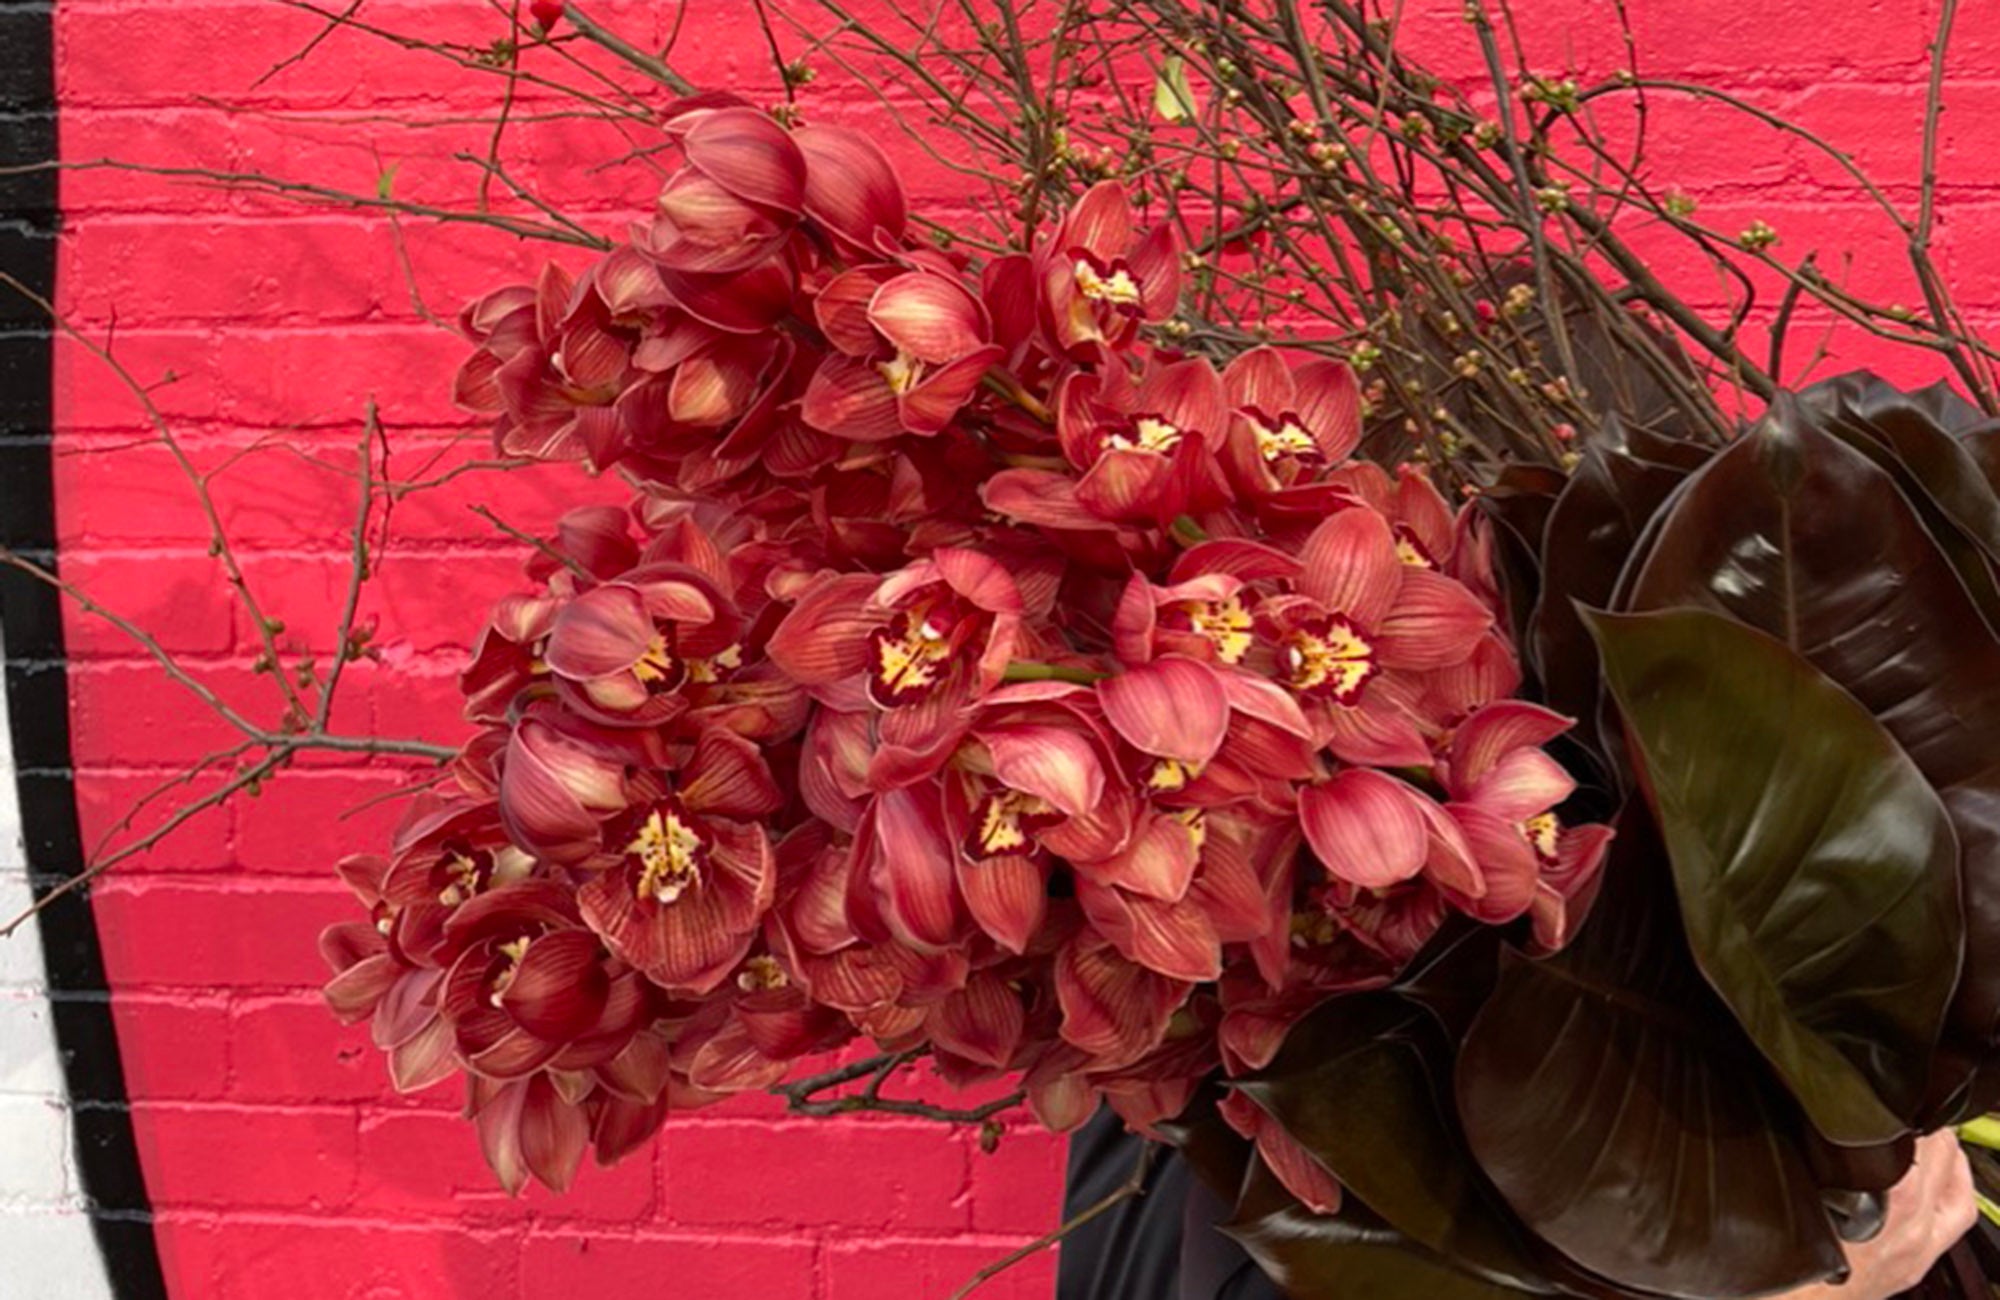 Cymbidium orchids in red colour with a red wall in background